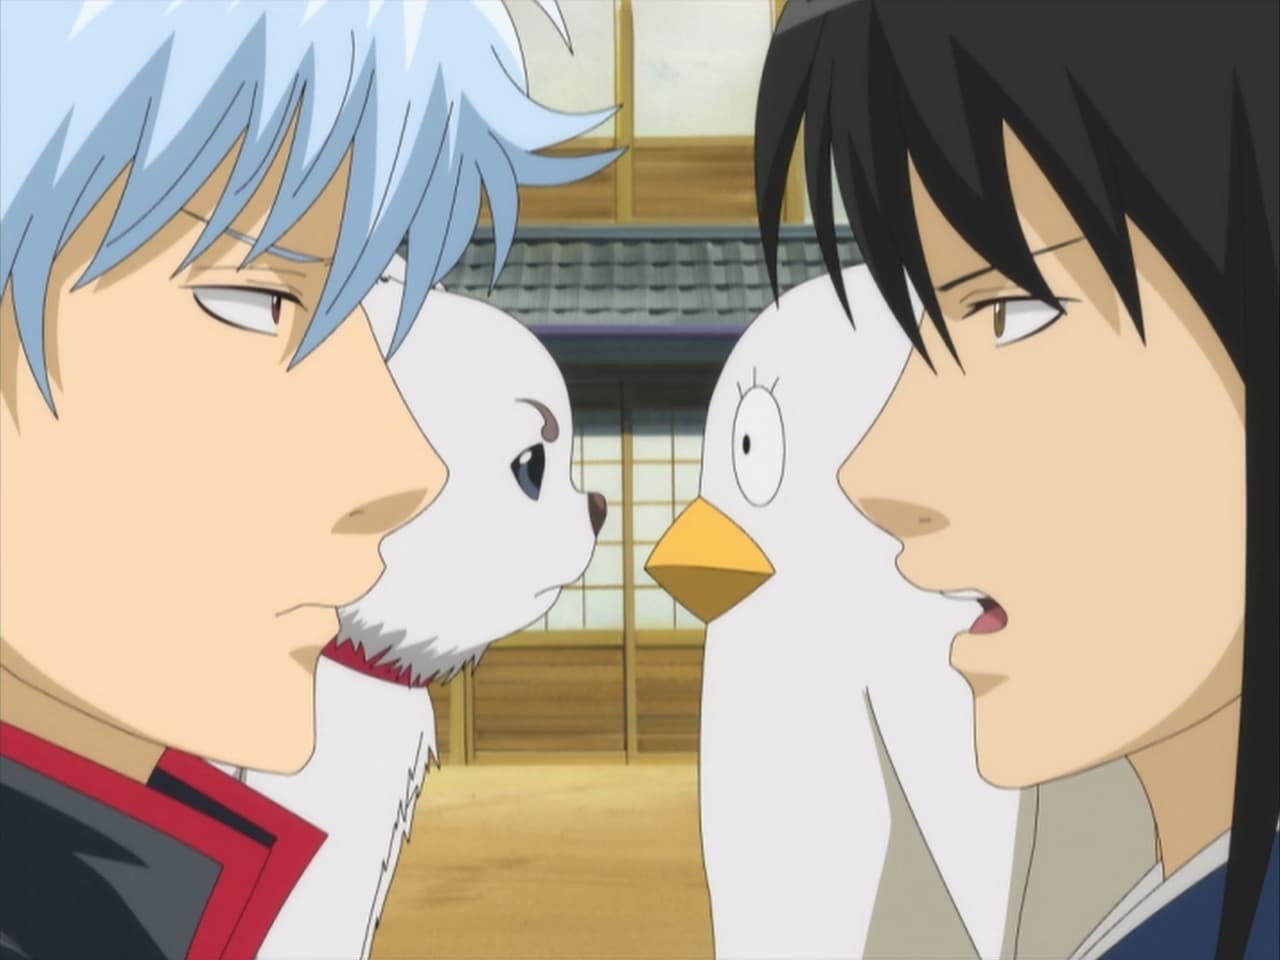 Gintama - Season 1 Episode 15 : Pets Resemble Their Owners!